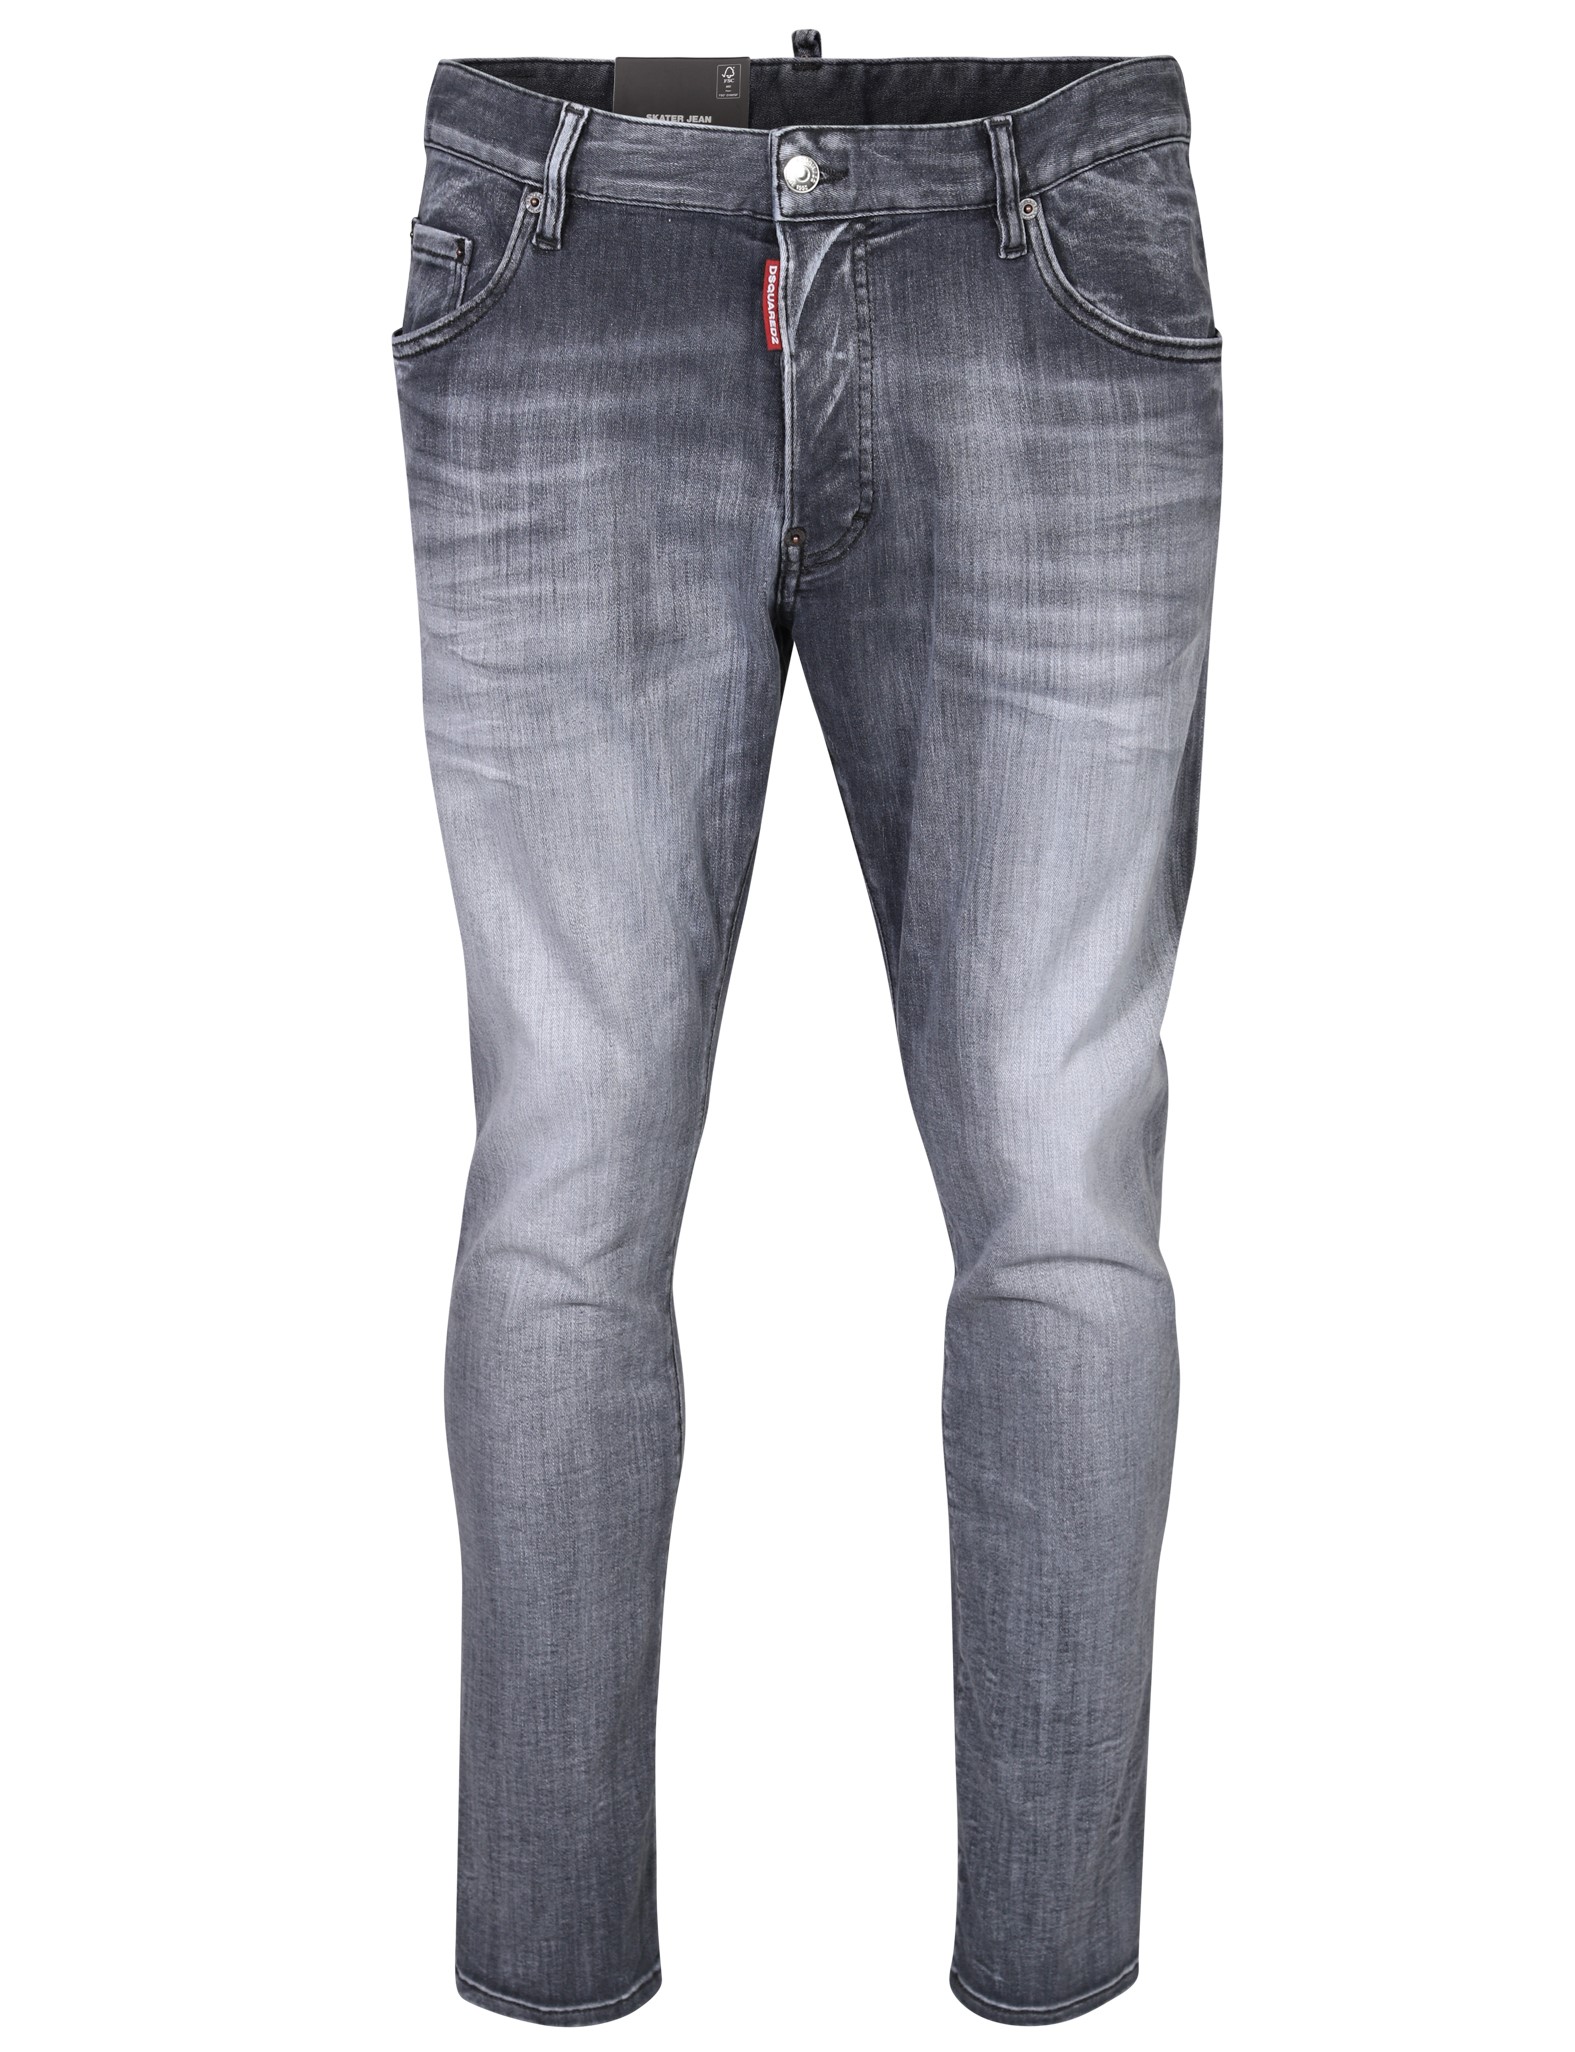 DSQUARED2 Skater Jeans in Washed Grey 54